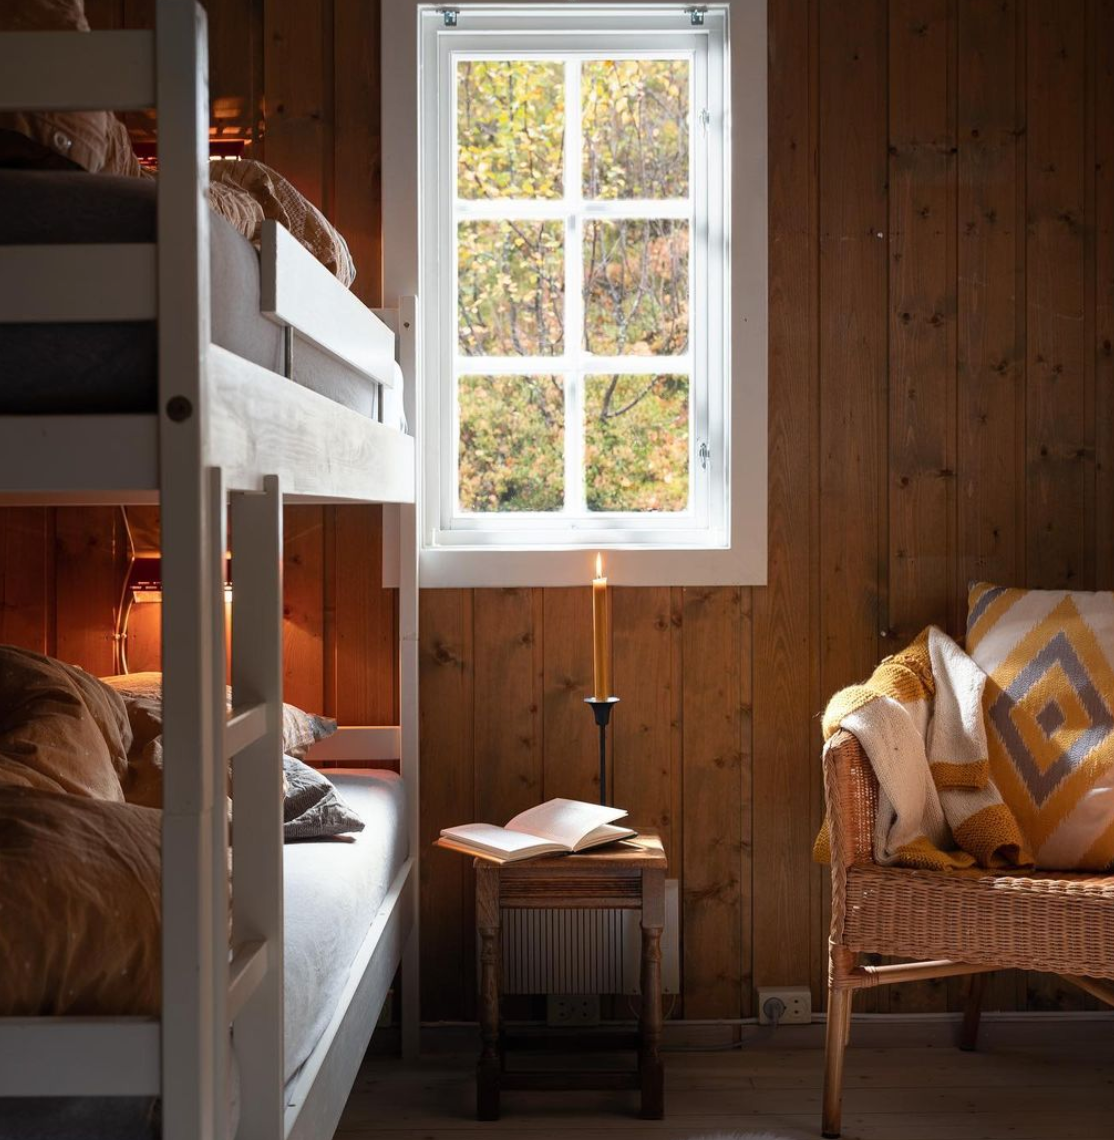 Cozy Friluftsliv bedroom complete with wooden bunk beds and an old candle.